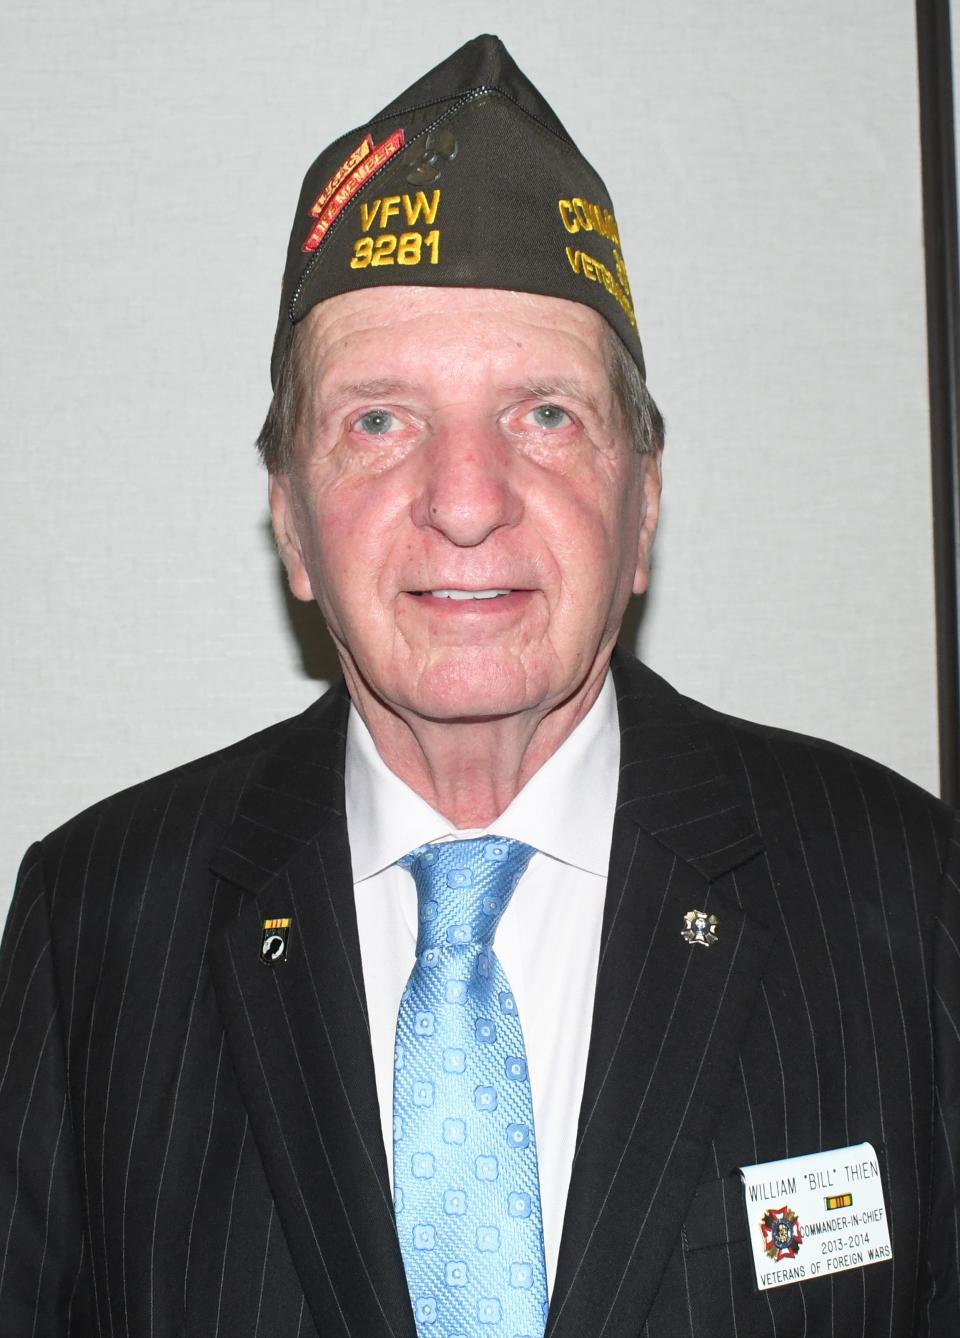 VFW National Representative and past National Commander-In-Chief William Thien spoke on topics facing veterans such as service-related health issues, suicide, concerns about higher education costs and lawyers looking to take advantage of veterans.